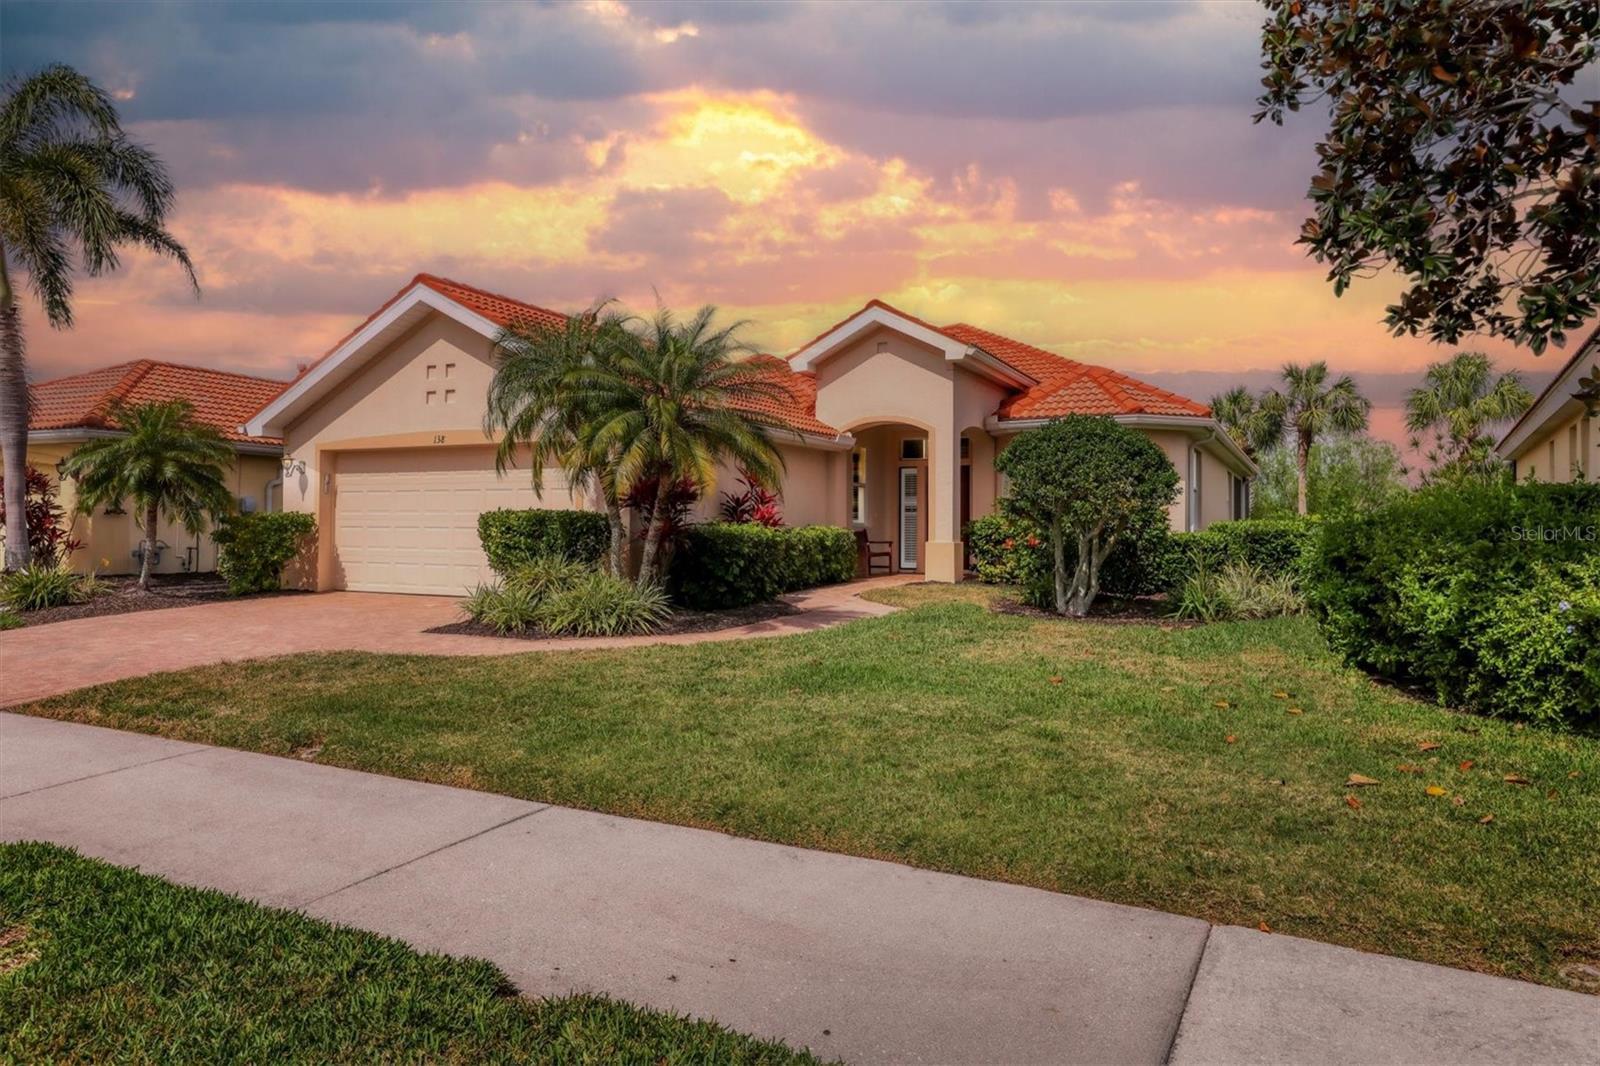 Photo one of 138 Treviso Ct North Venice FL 34275 | MLS A4601978